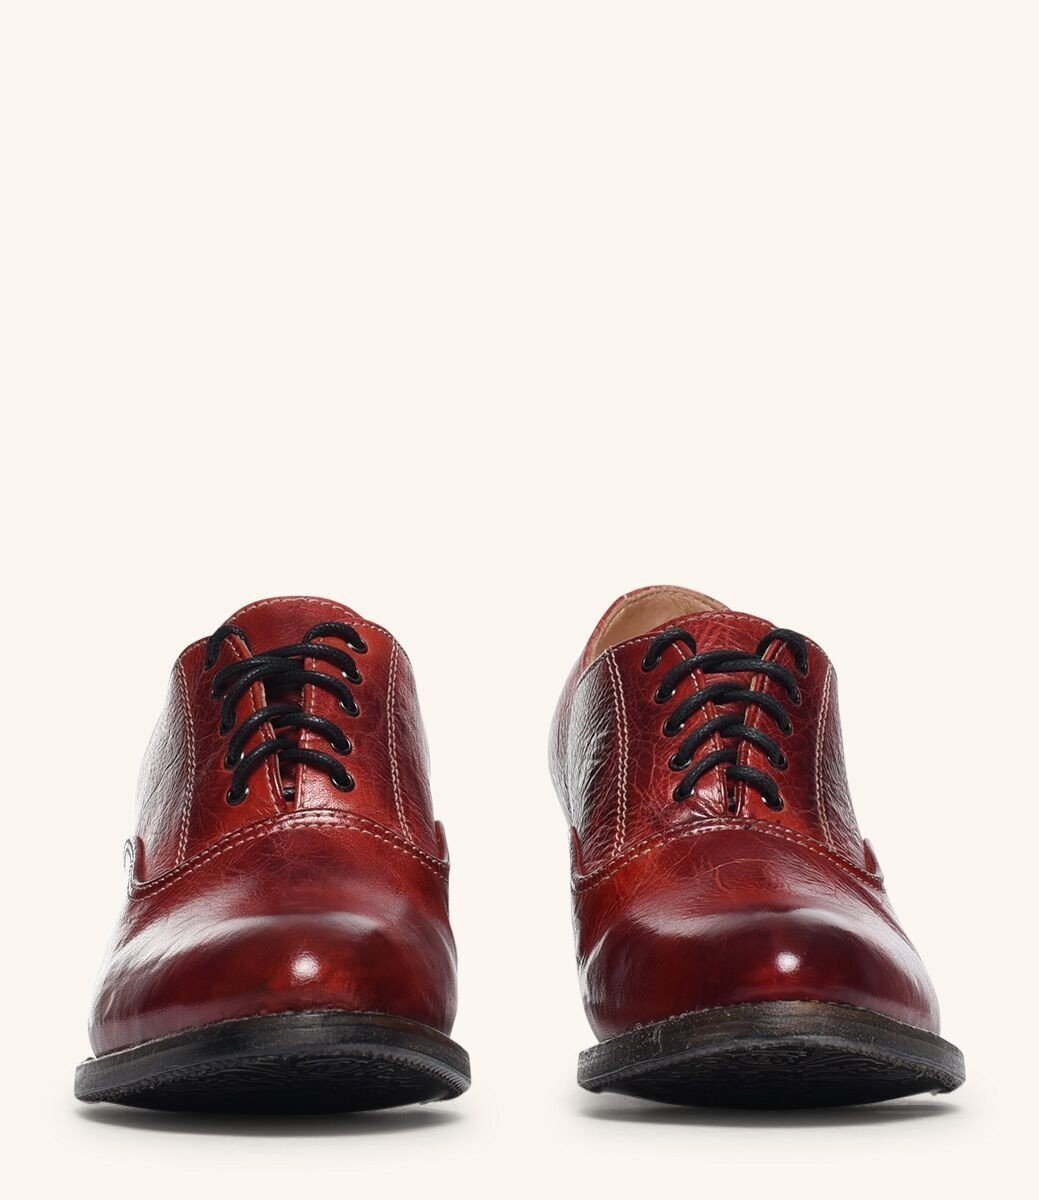 Victorian Style Leather Lace-Up Shoes in Red Rustic